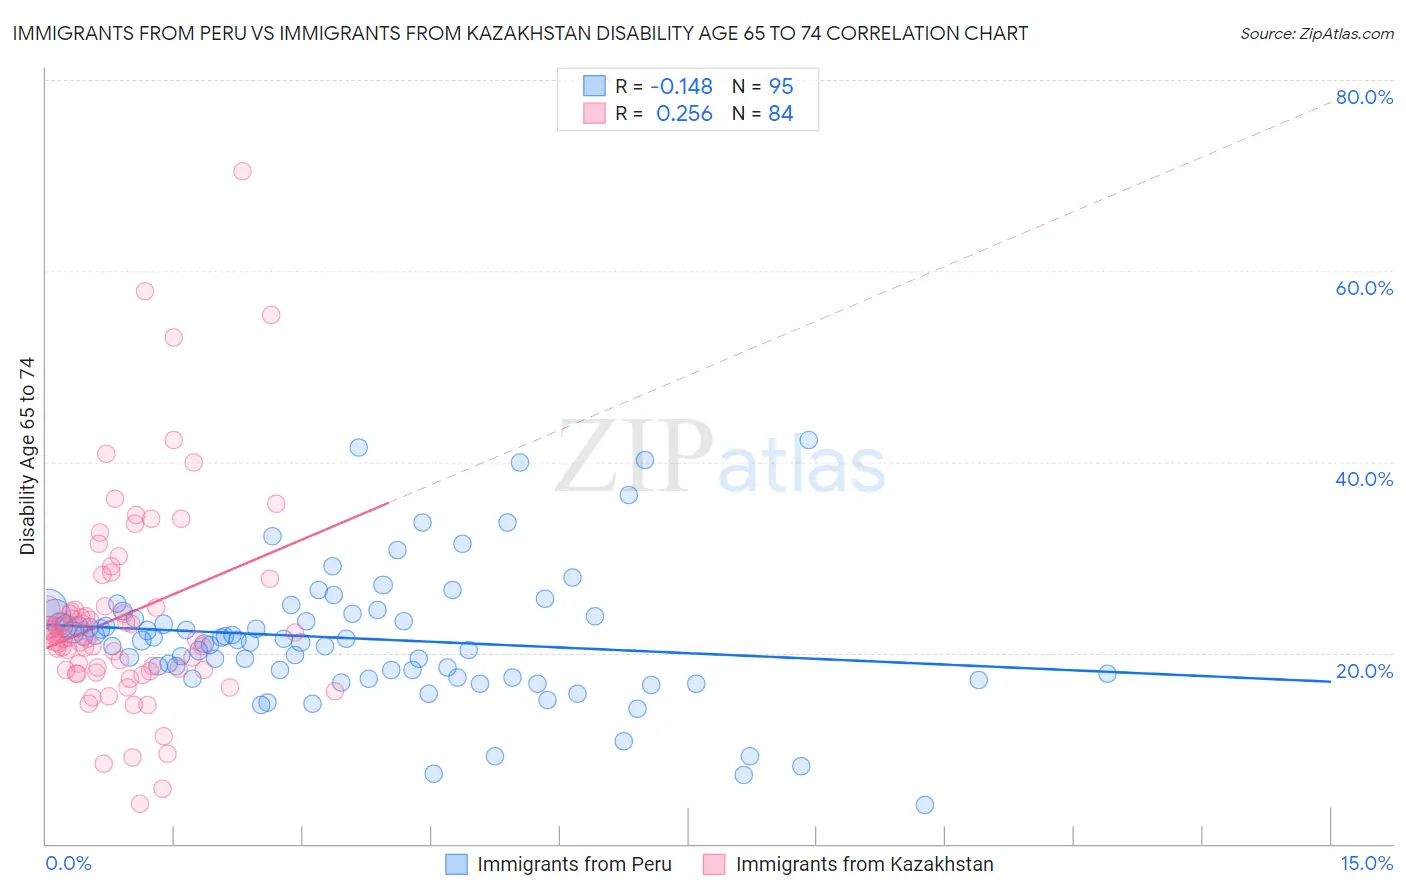 Immigrants from Peru vs Immigrants from Kazakhstan Disability Age 65 to 74